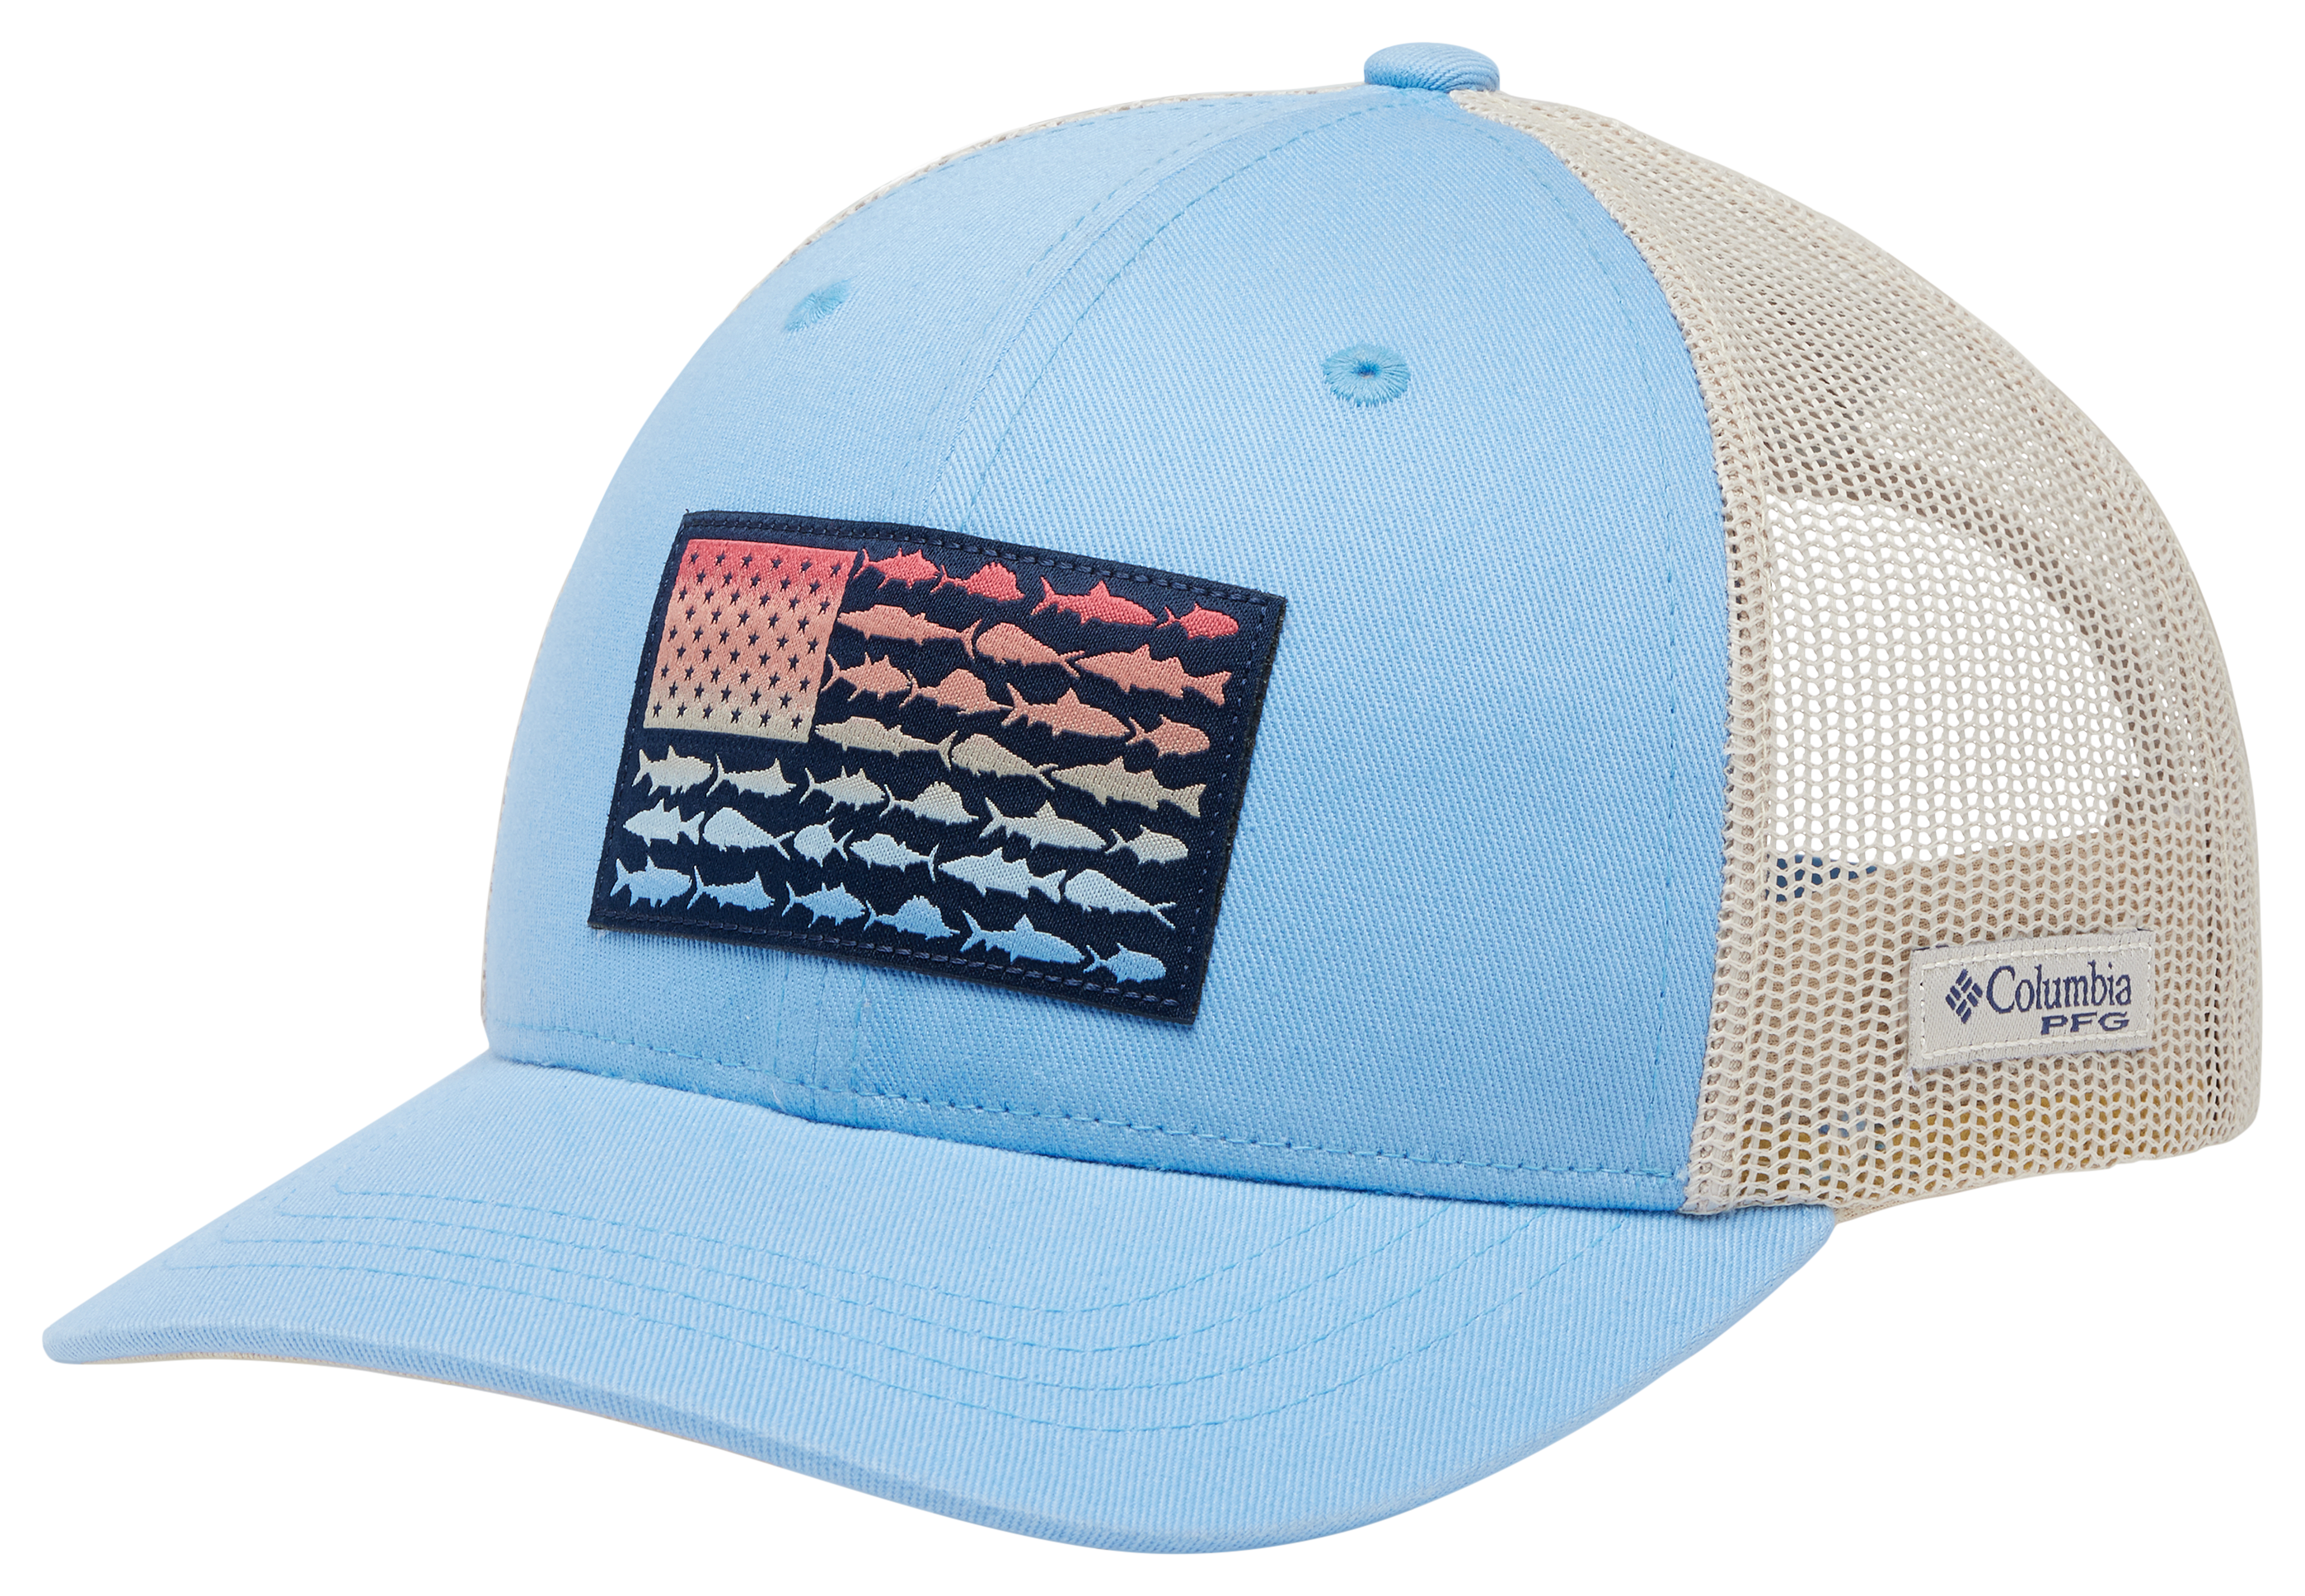 Columbia PFG FISH BASS HAT FISHING STATESIDE L XL LARGE EXTRA BLUE FITTED  USA for sale online